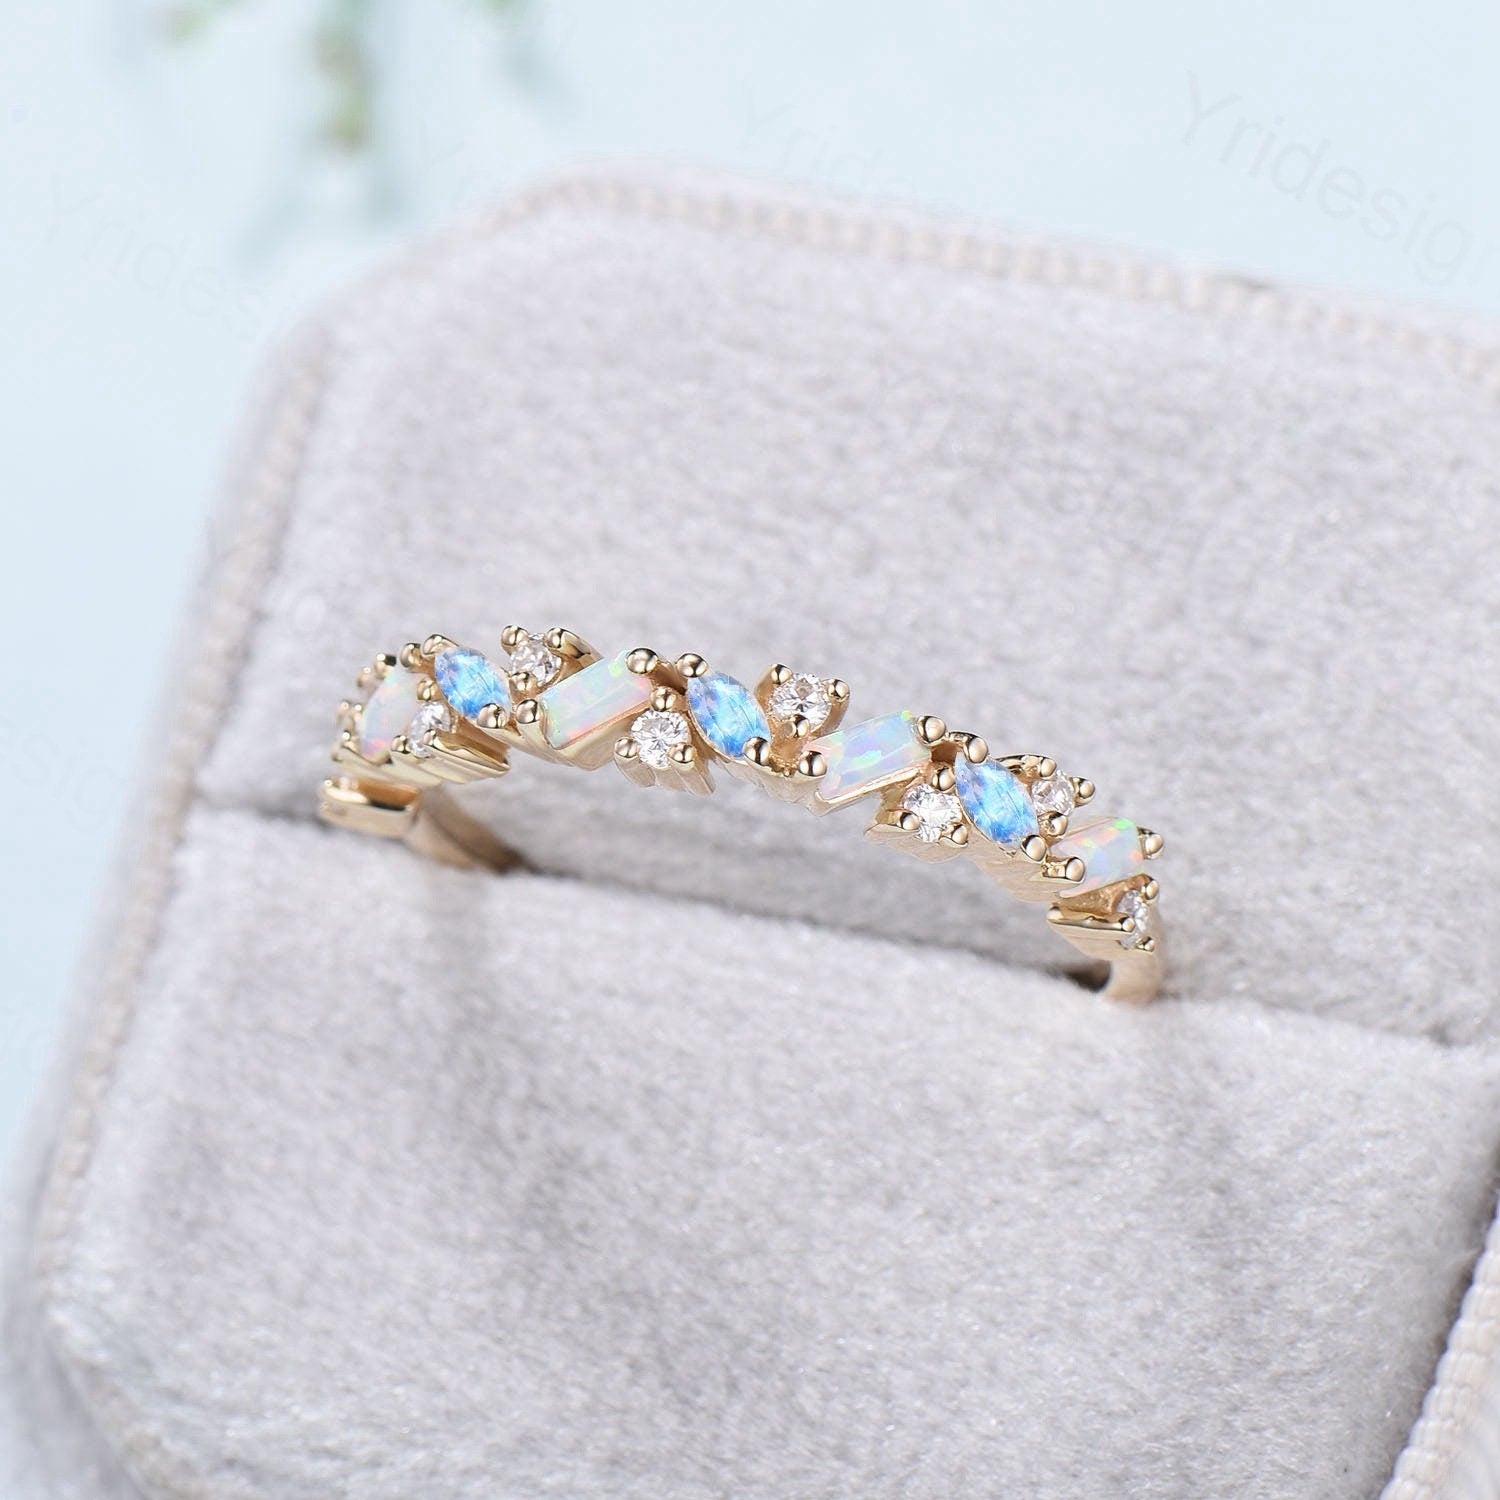 Vintage Opal Moonstone Eternity Wedding Band Women Unique Baguette  White Opal Stackable Ring Art Deco Matching Band Anniversary Gift - PENFINE